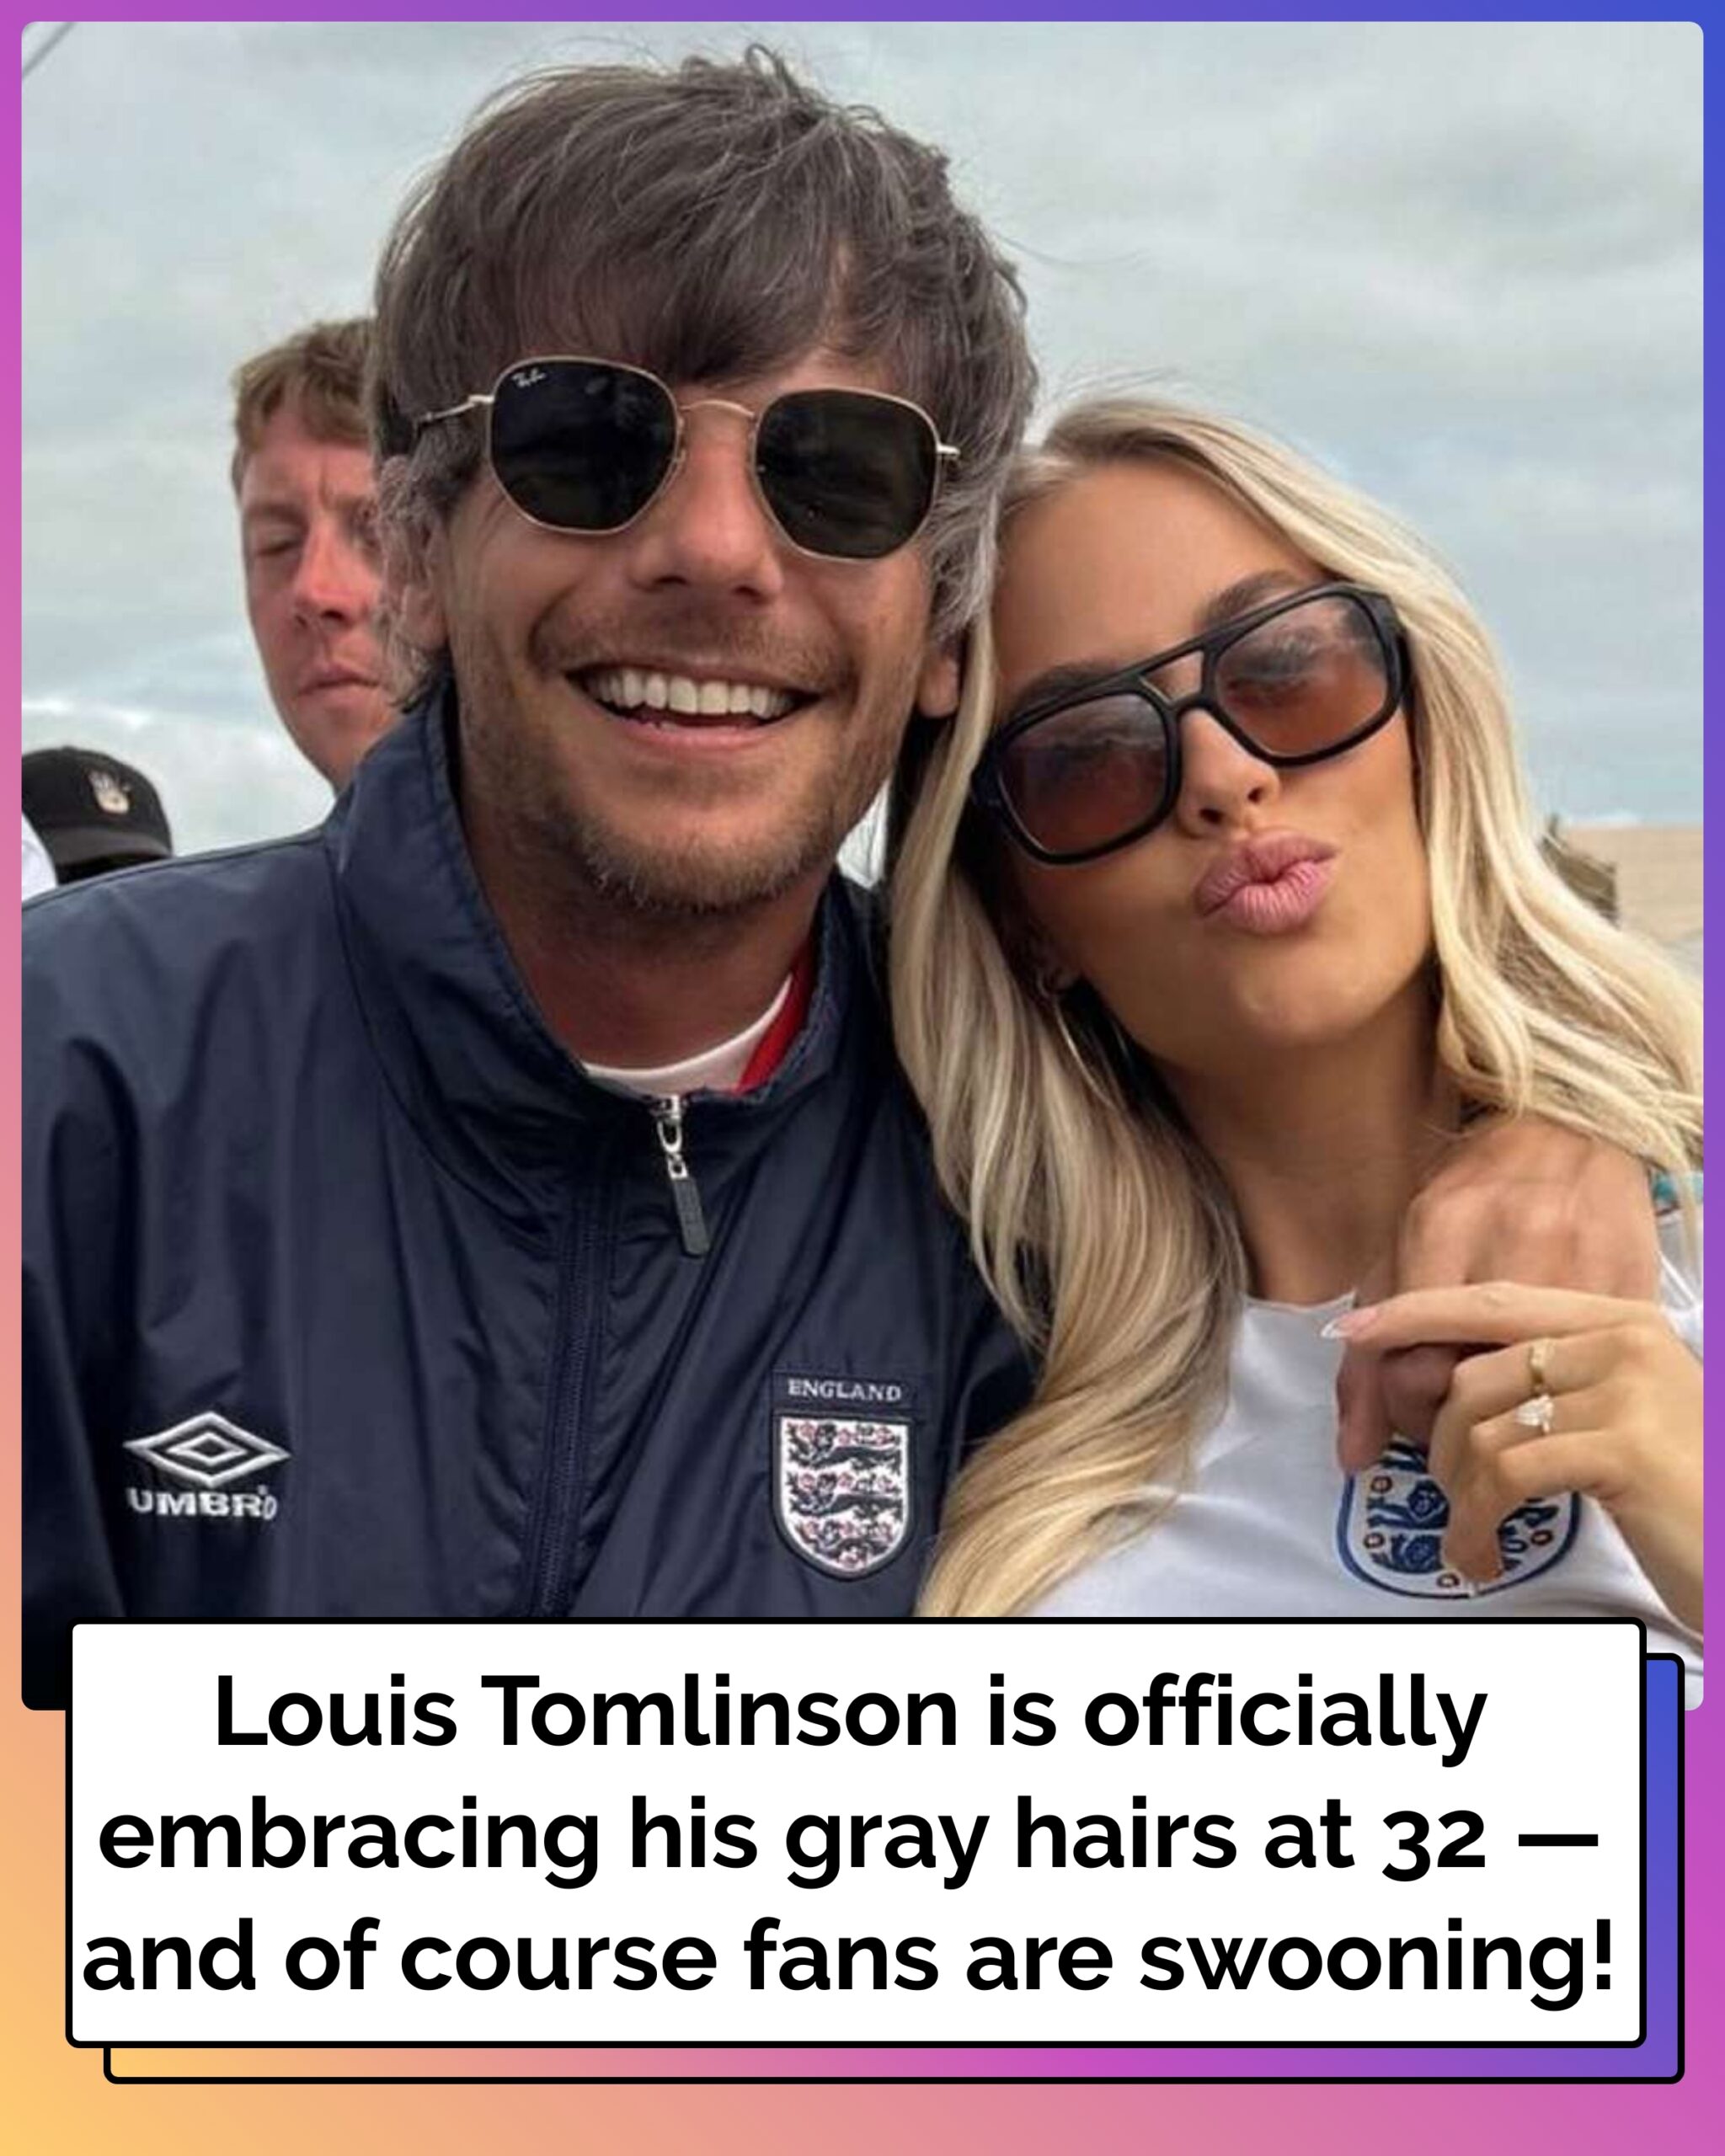 Louis Tomlinson Is Officially Embracing His Gray Hairs at 32 — and of Course Fans Are Swooning!